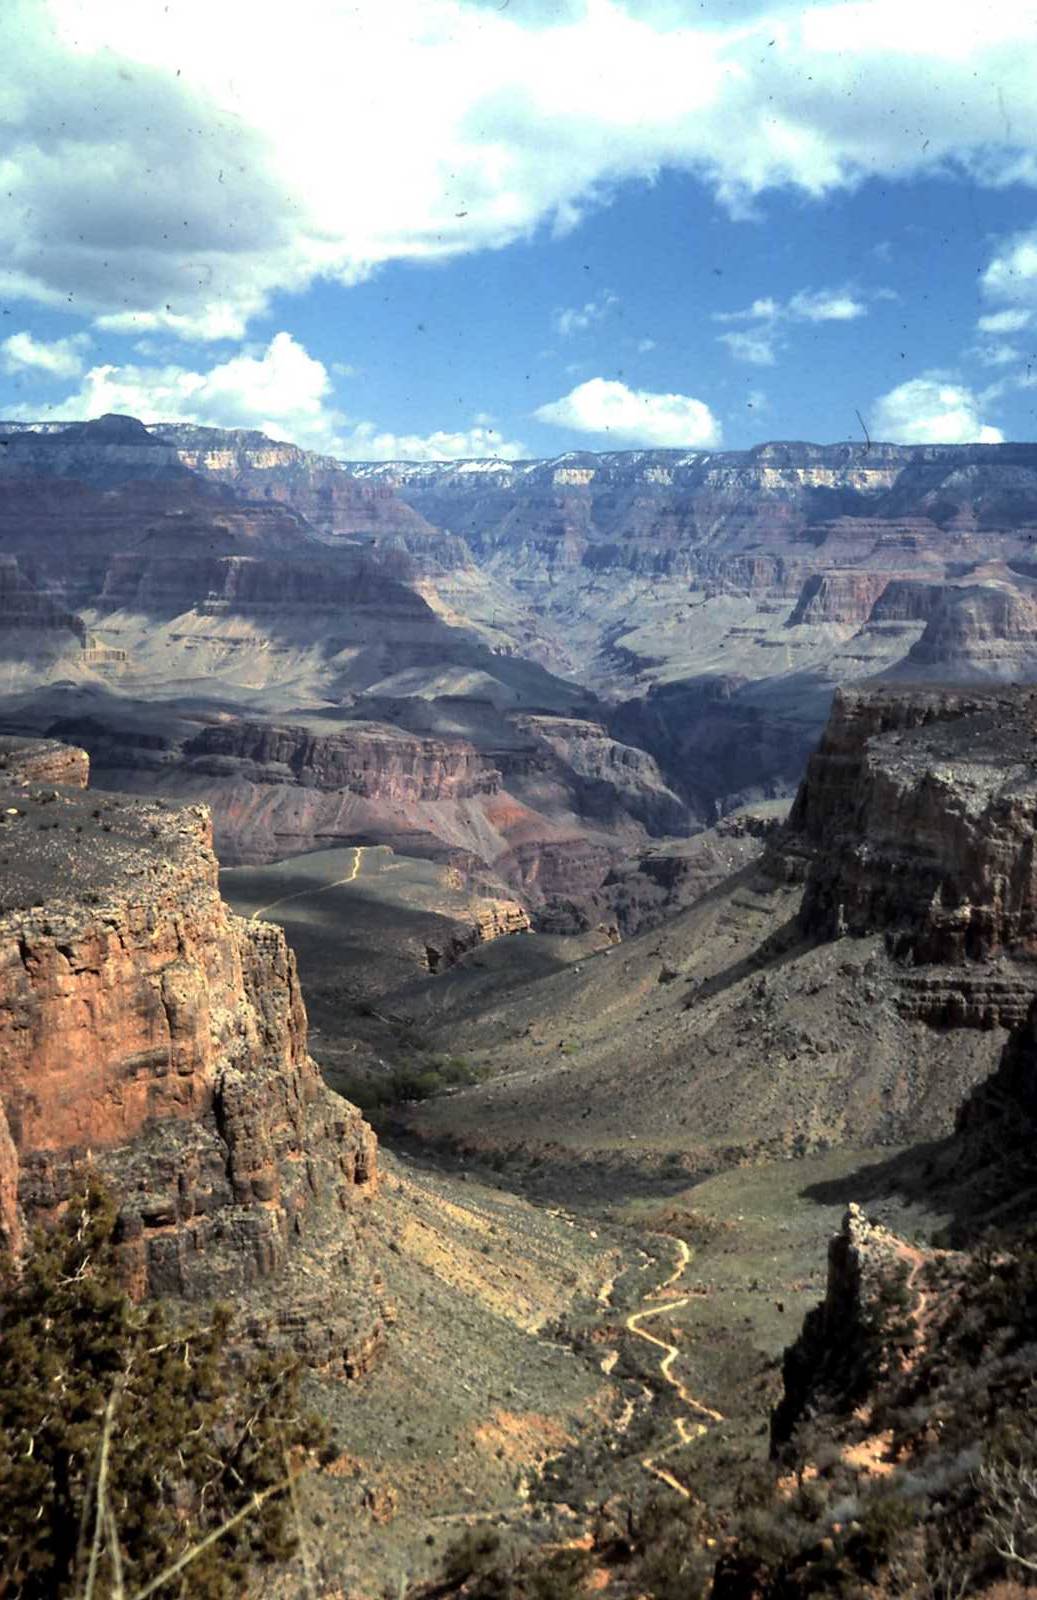 1980 Spring Break Trip to the Grand Canyon